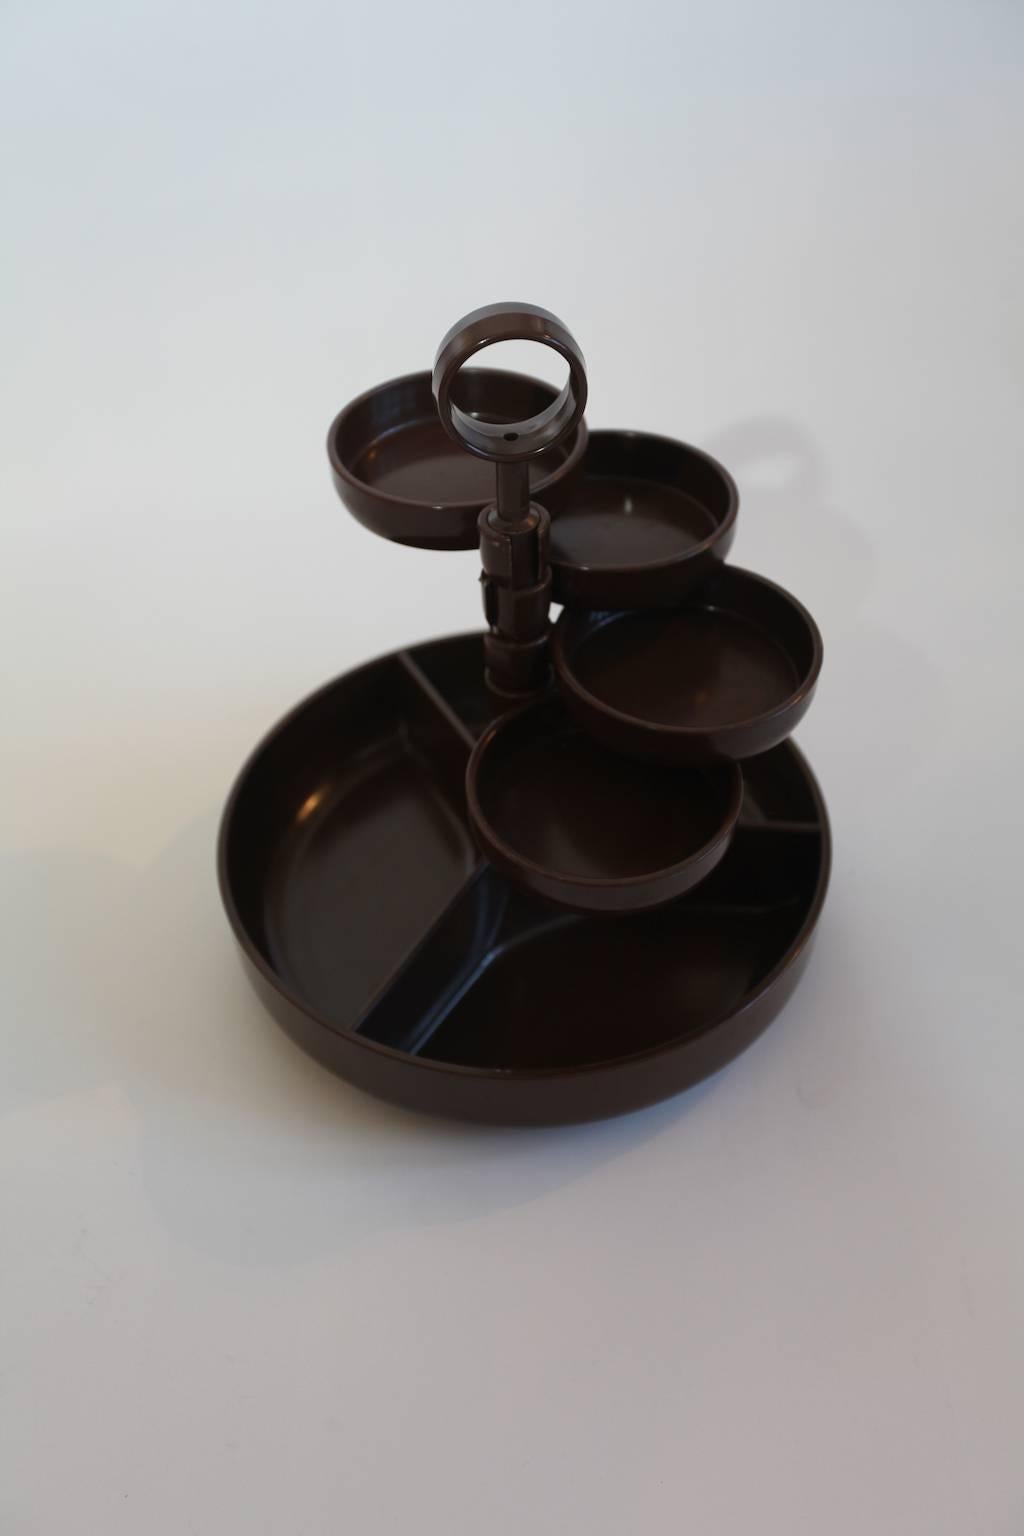 Fun Brown Dialene Better Maid 1970s Party Snack Server with Rotating Dishes In Good Condition For Sale In Malmo, SE